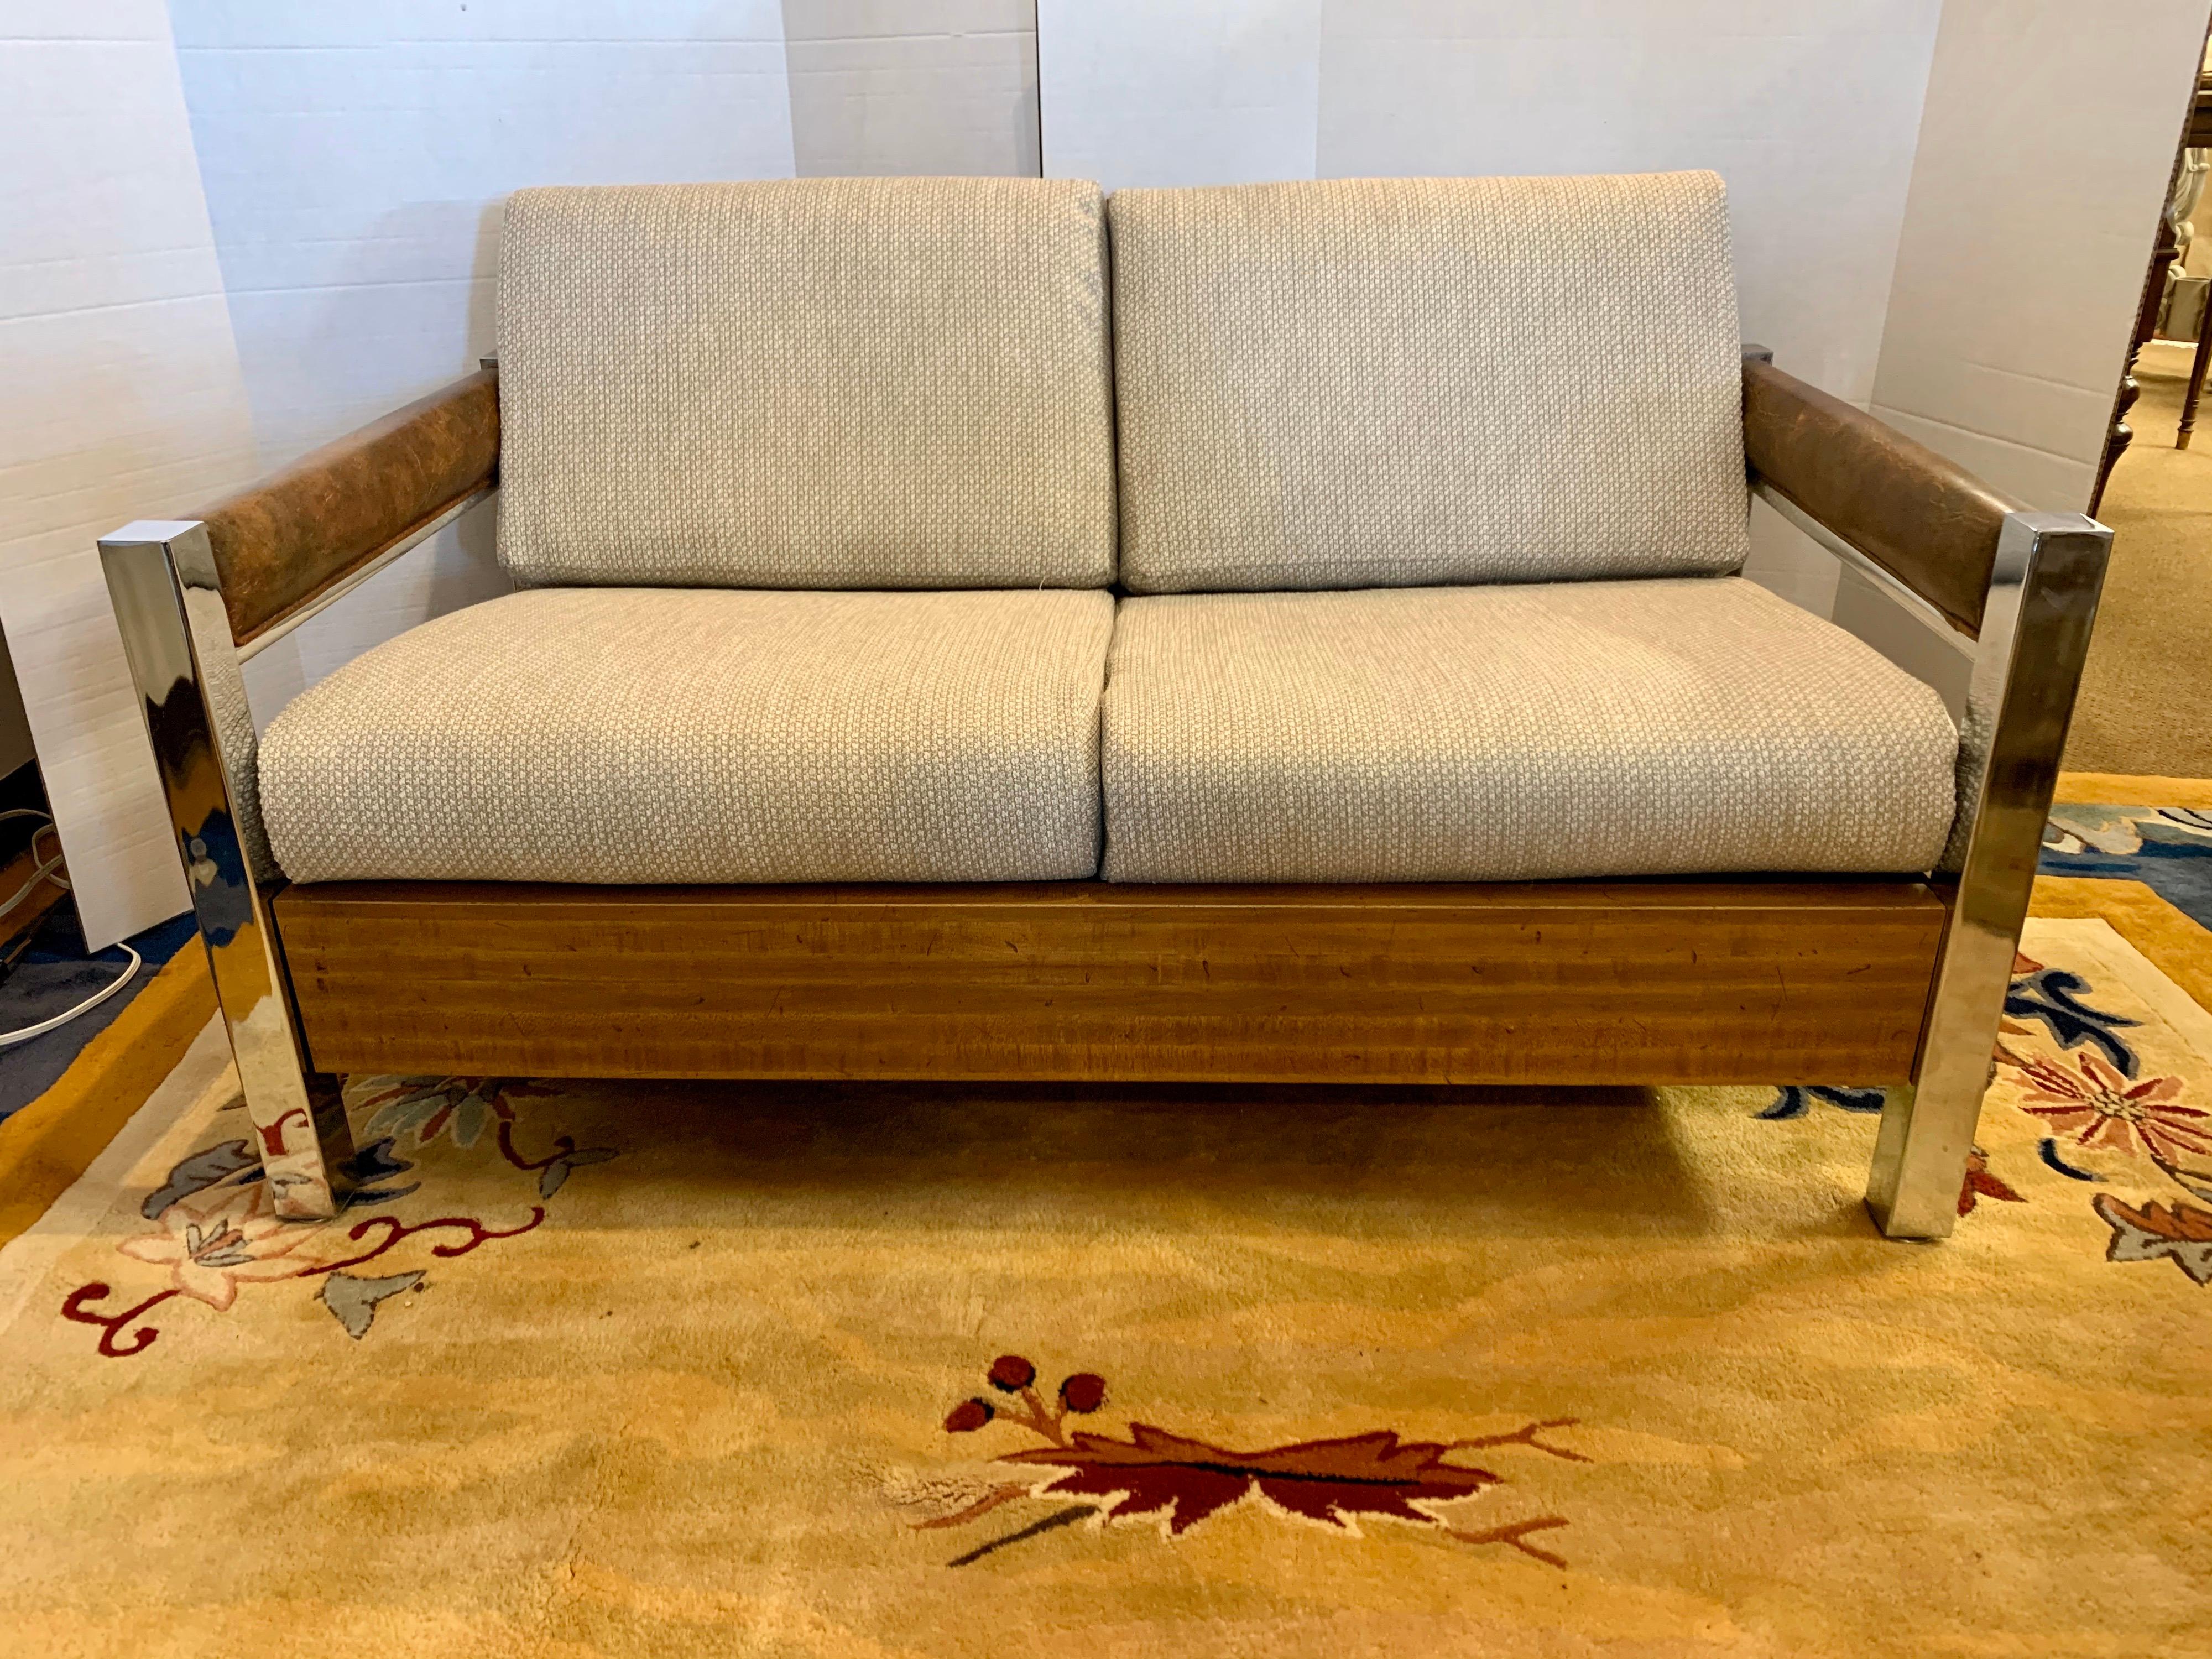 Made in the United States in the 1970s, this Milo Baughman style lounge loveseat has newer neutral upholstery and great lines.